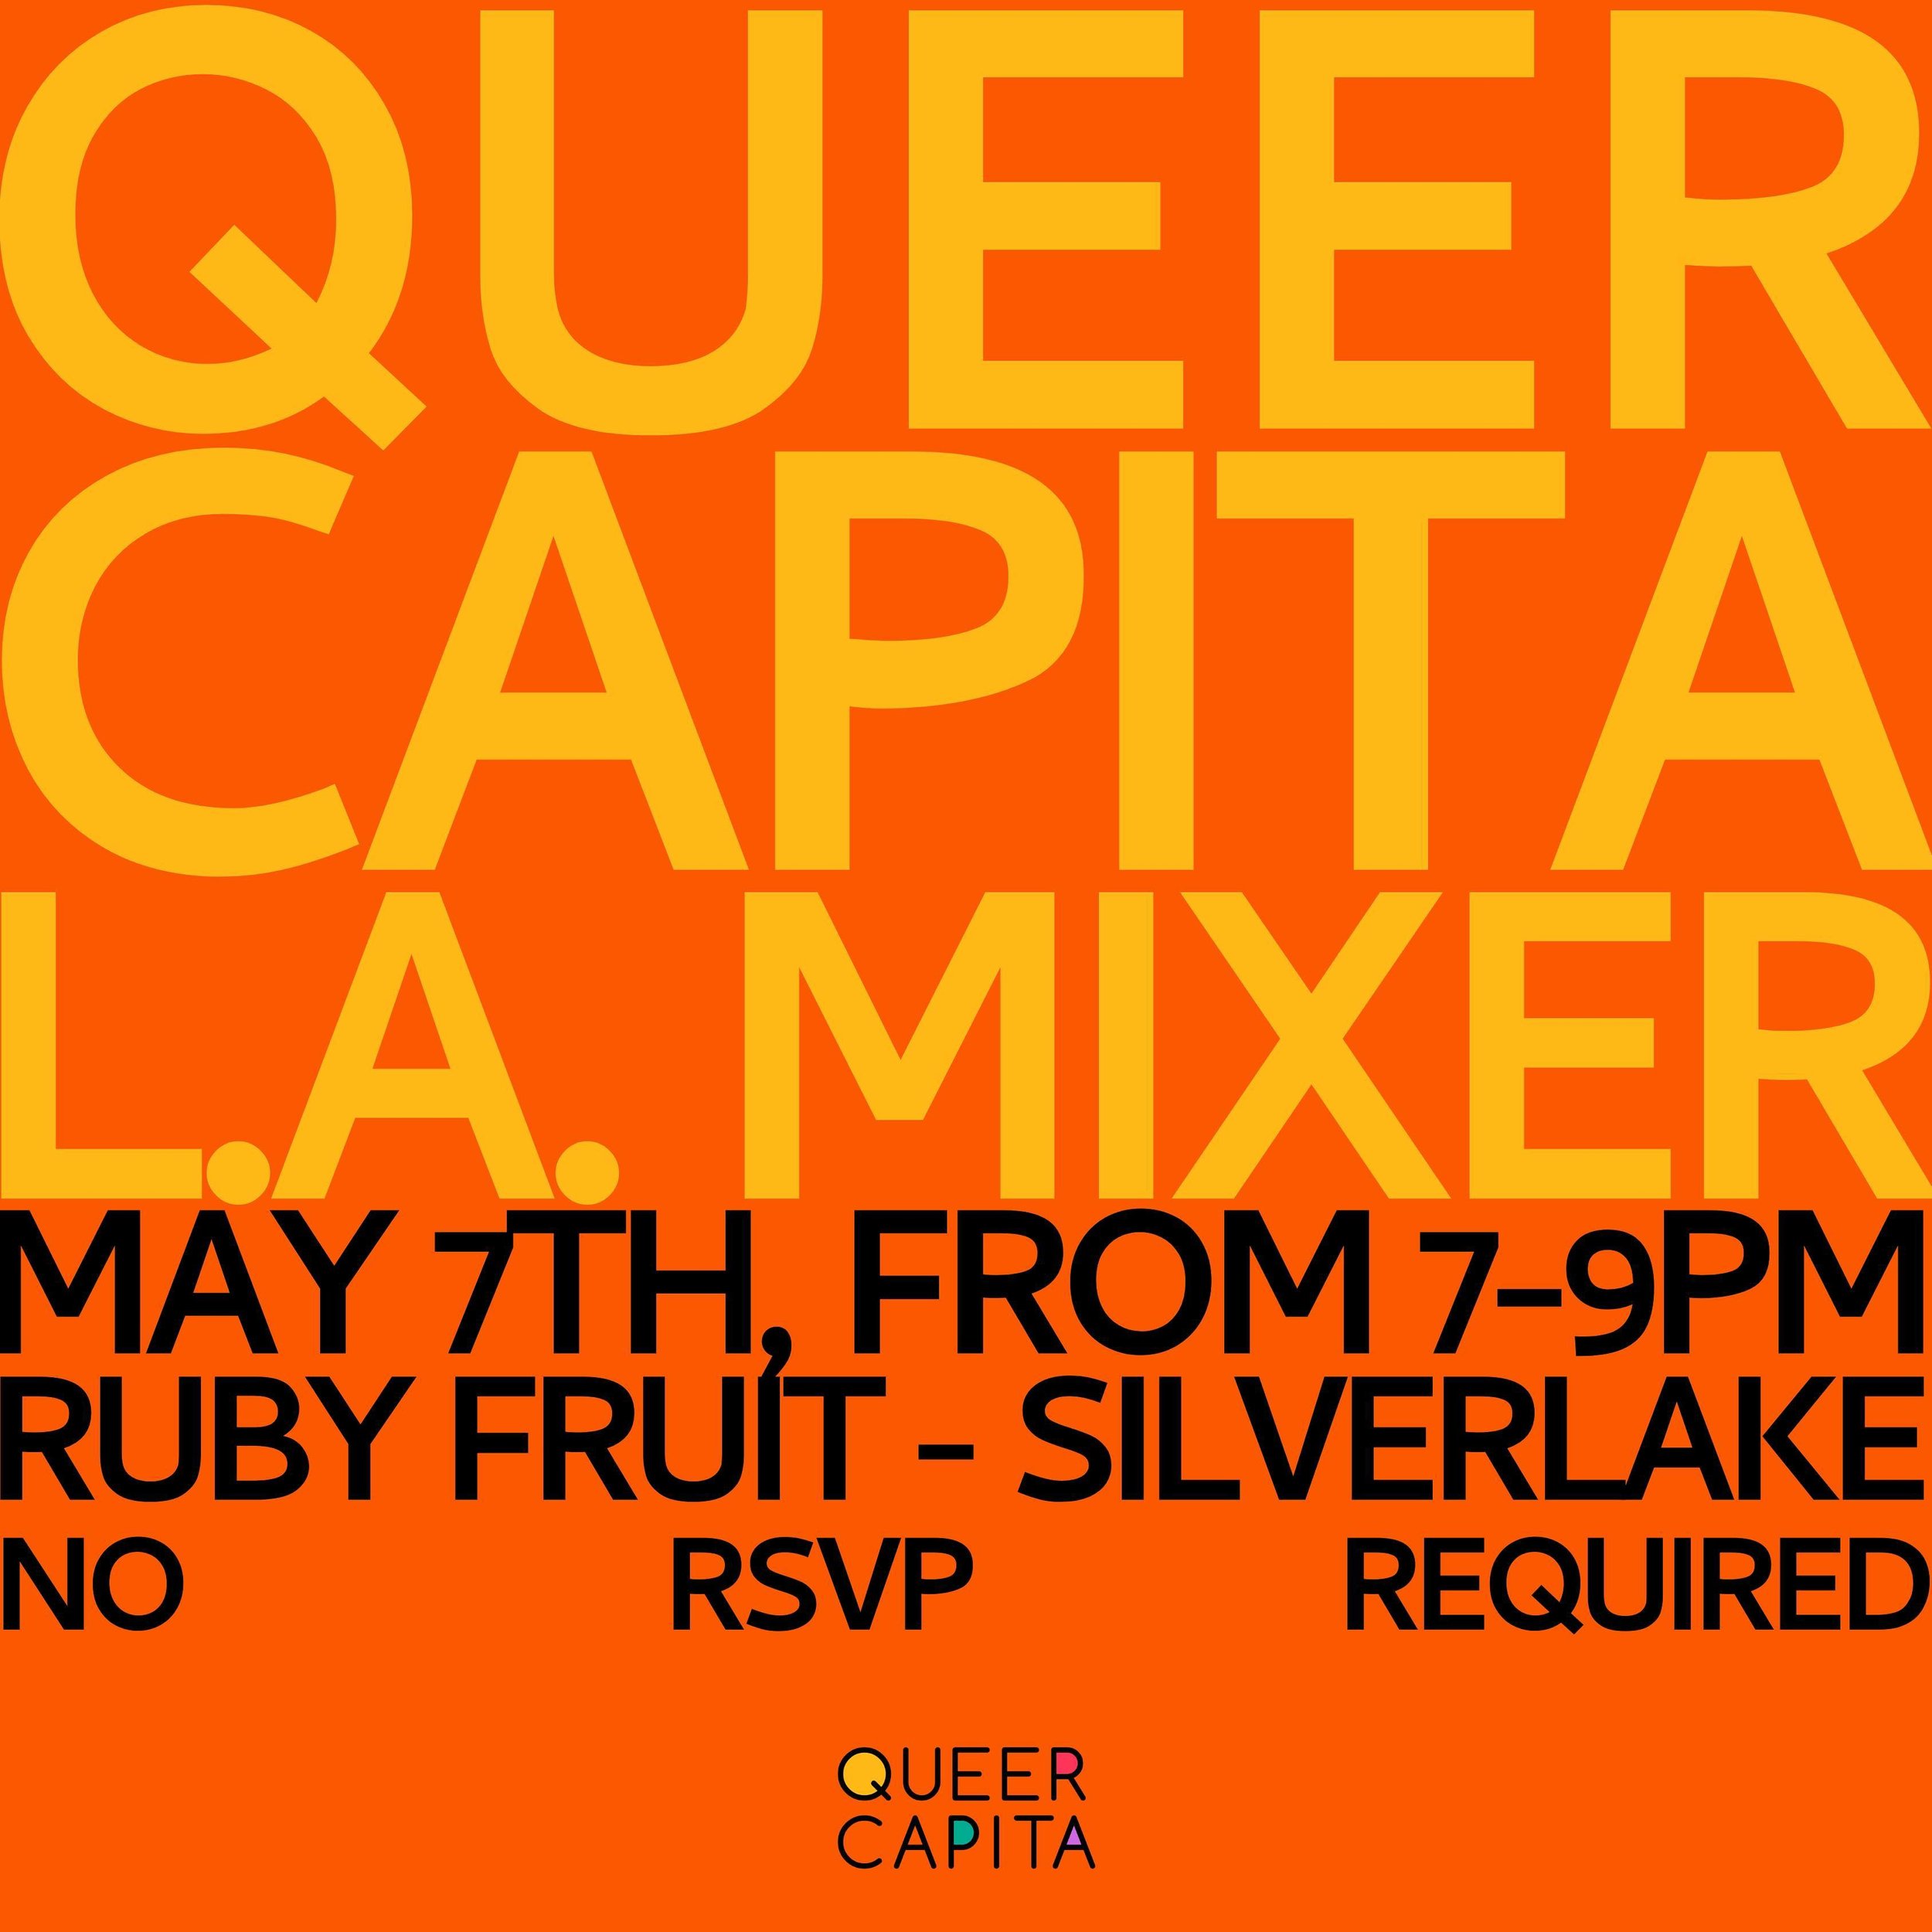 LA family we&rsquo;ll see you Tuesday at our mixer at The Ruby Fruit!